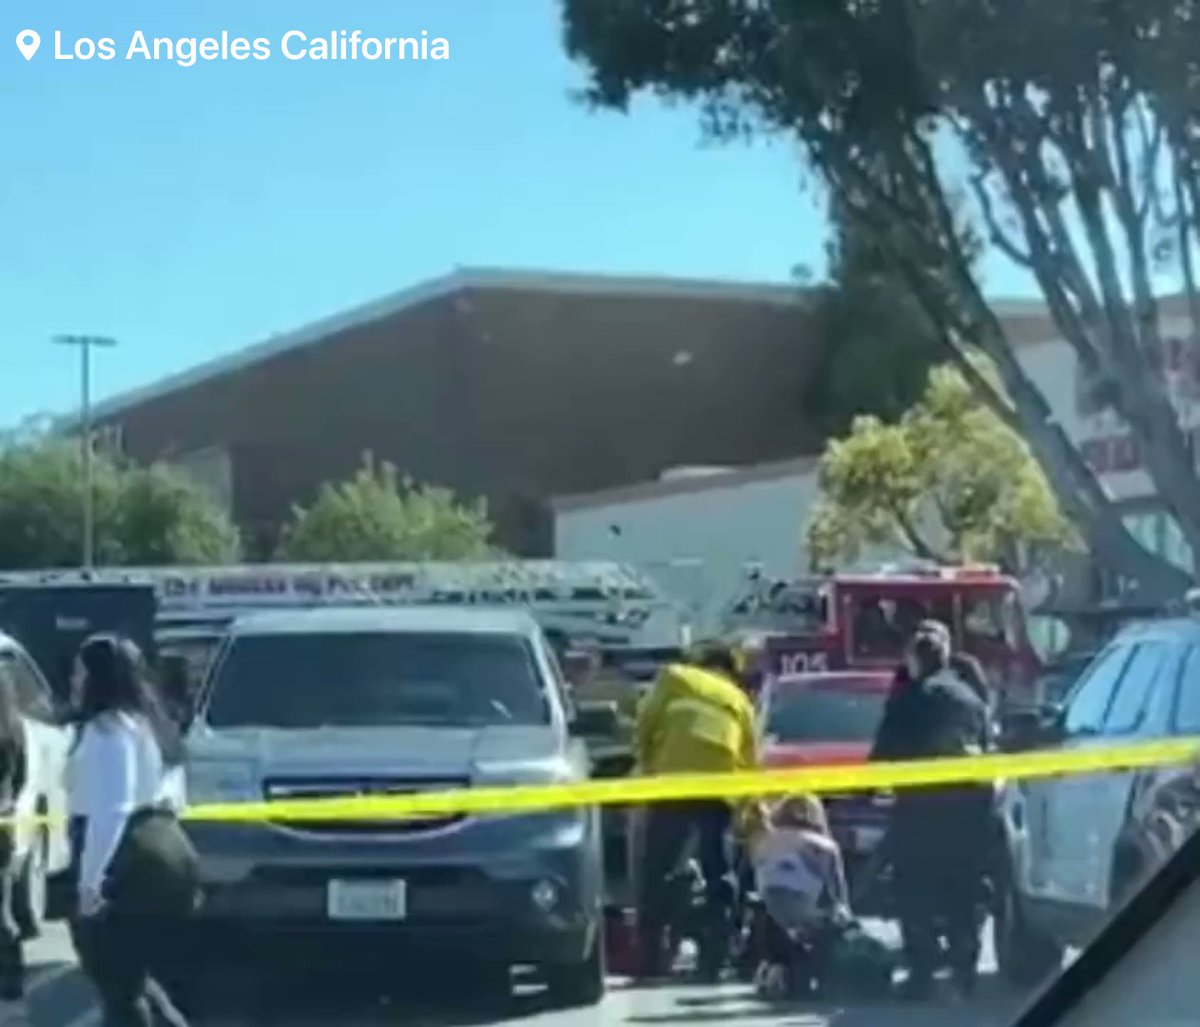 Multiple people have been shot at Trader Joe's Grocery     LosAngeles   California    Currently a massive response underway as multiple people have been shot at a Trader Joe's Grocery reports are saying that  3-4 people have been shot with at least one fatality